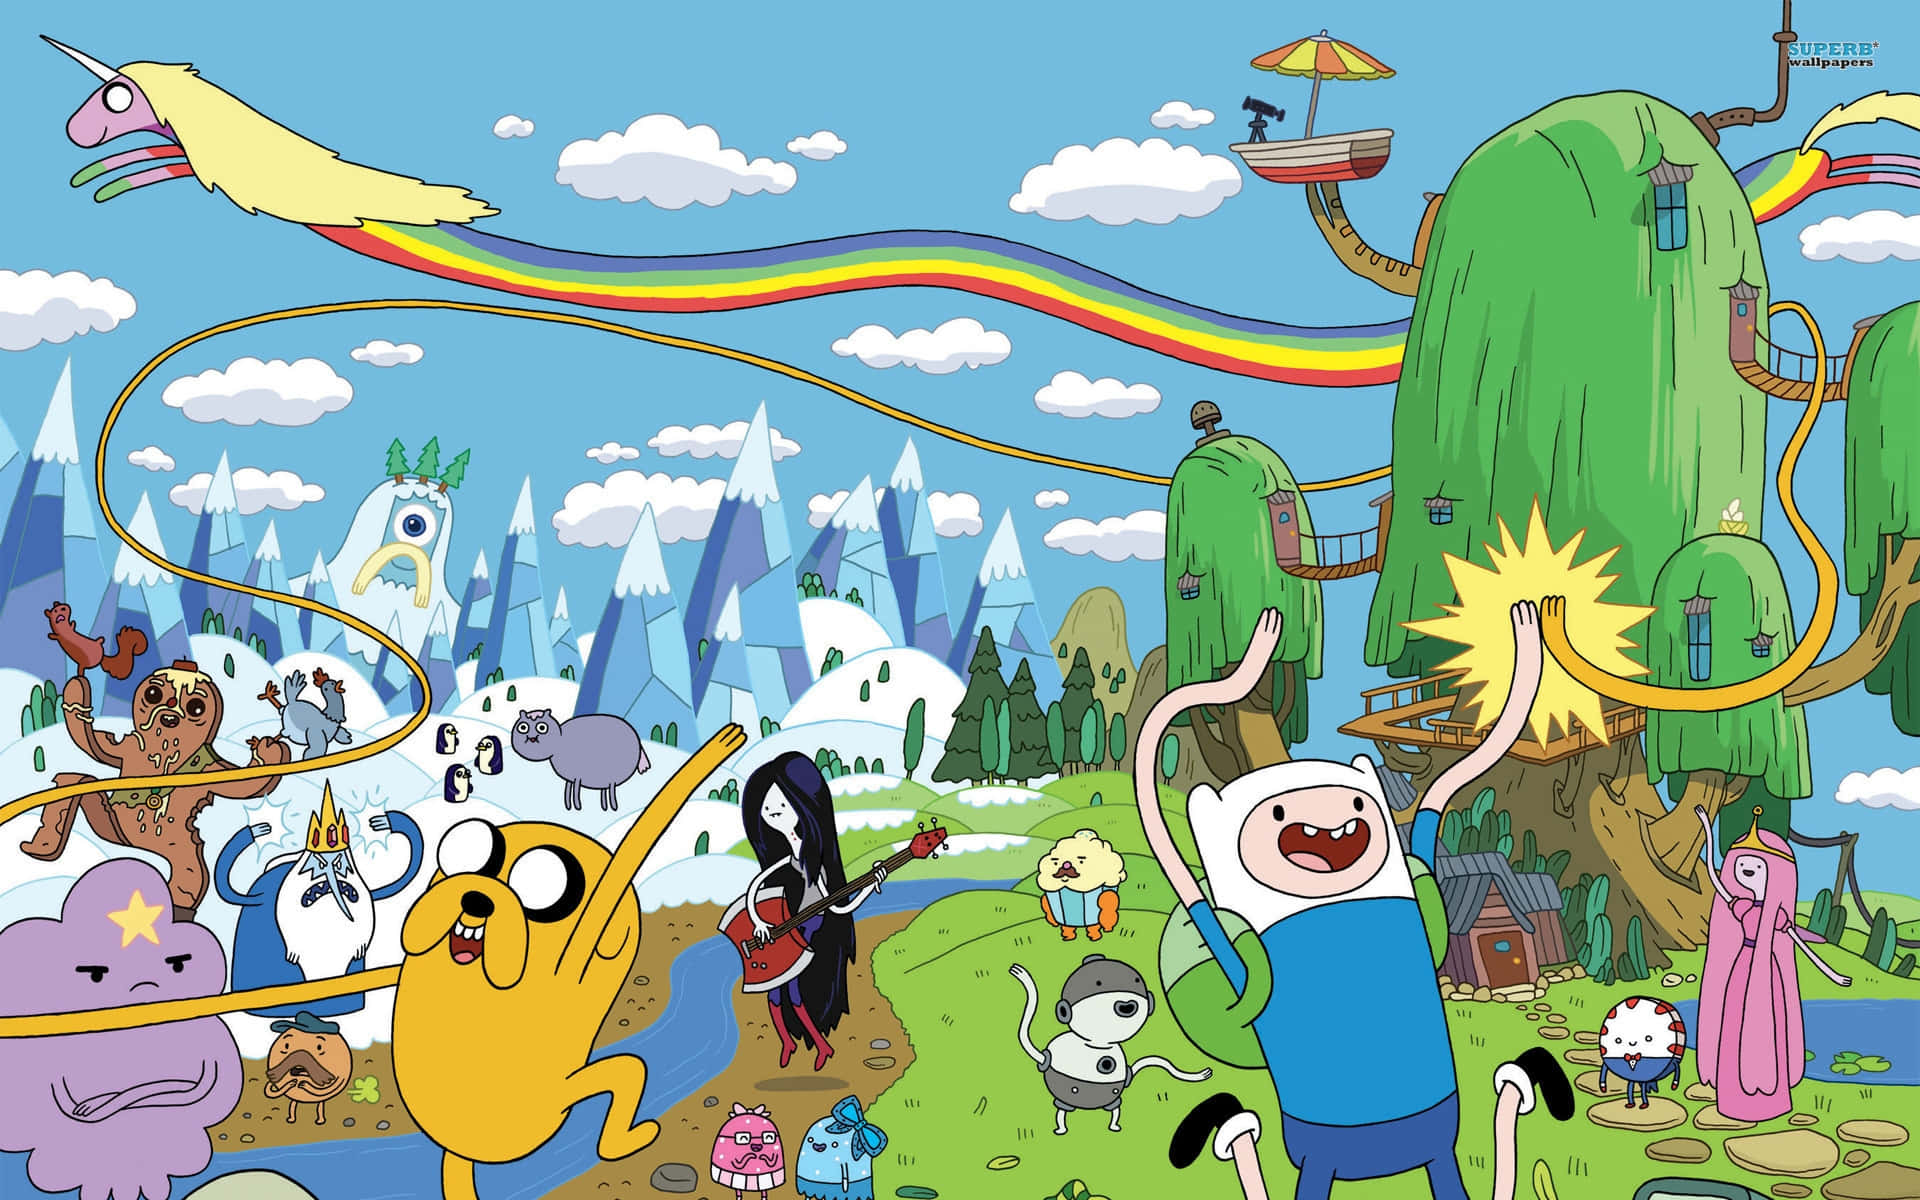 Join Finn and Jake on their Amazing Adventure Through the Land of Ooo